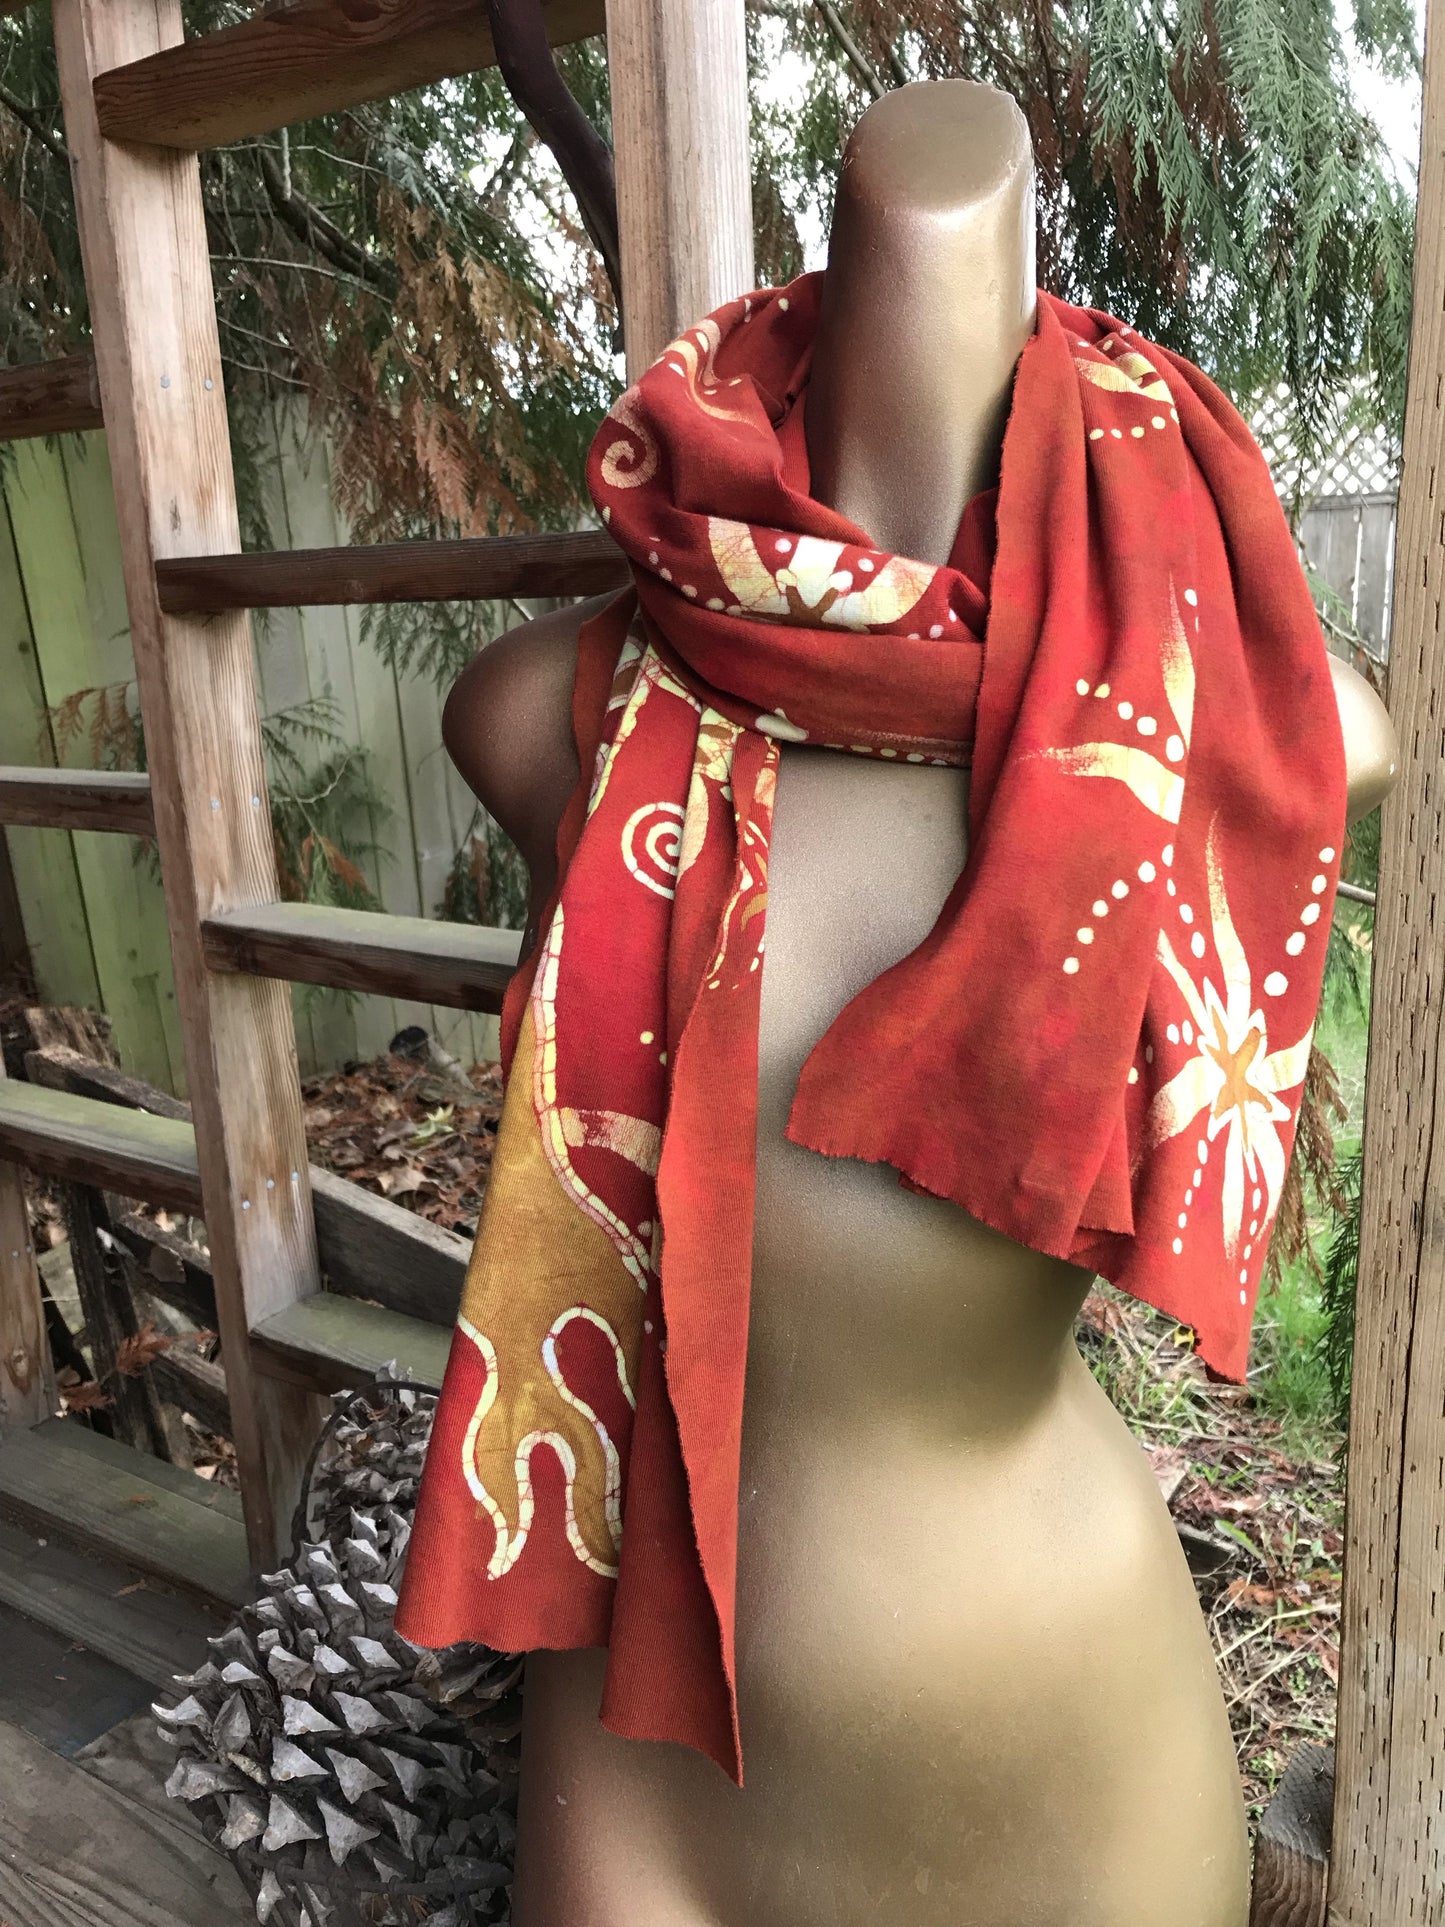 Warmth Of The Sun Hand Painted Organic Cotton Batik Scarf